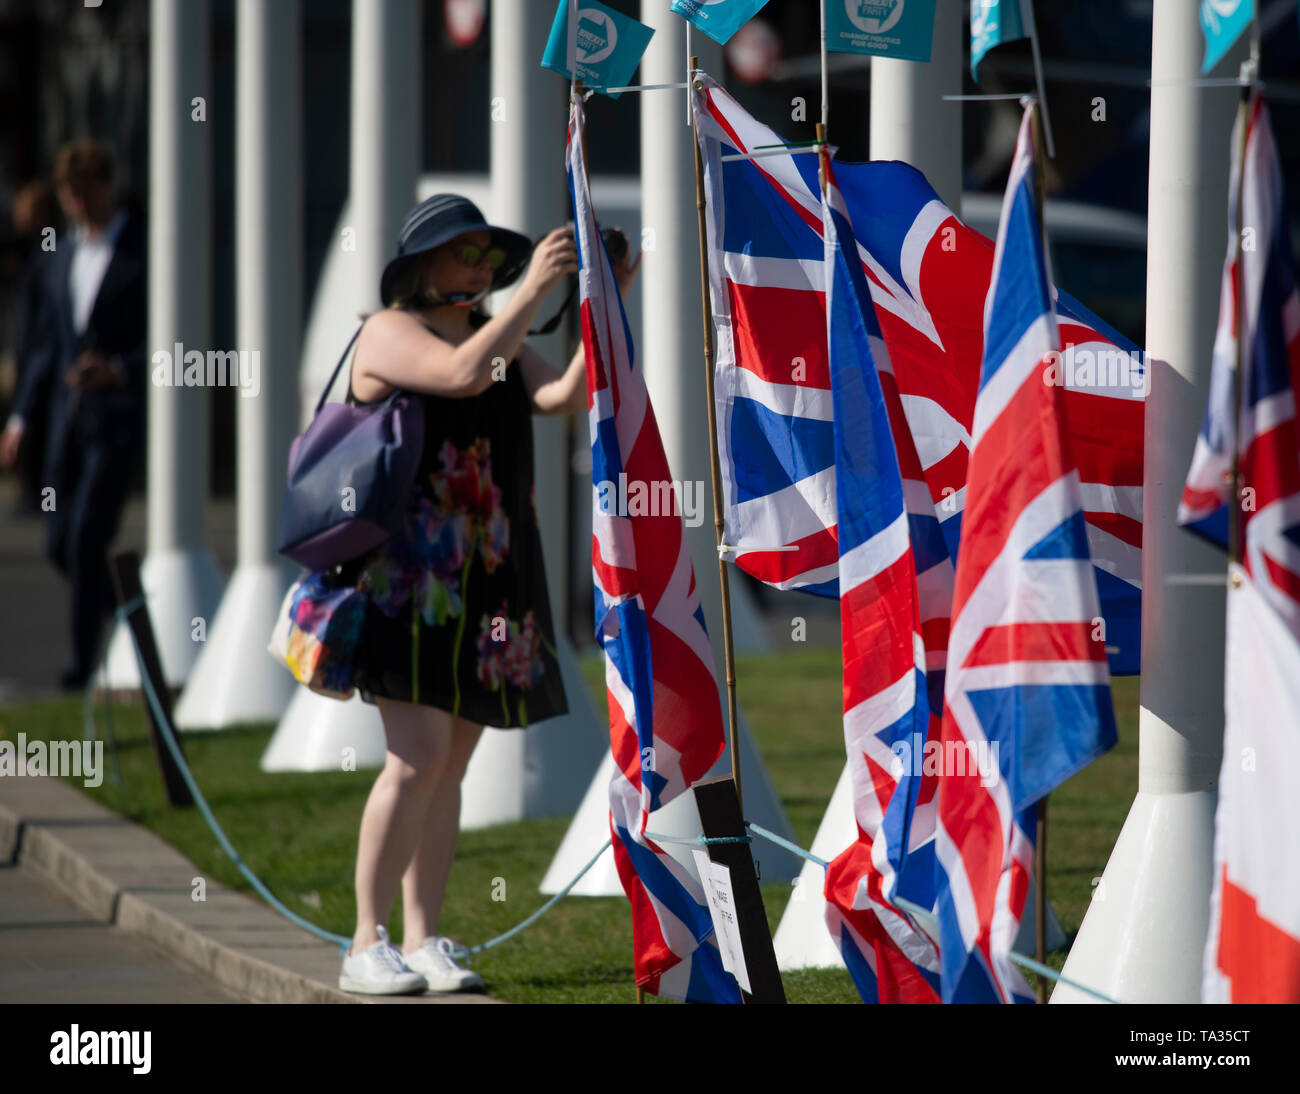 Brexit Party stickers and national flags line Parliament Square on 21st May 2019, before the EU MEP elections on May 23rd. Credit: Malcolm Park/Alamy. Stock Photo